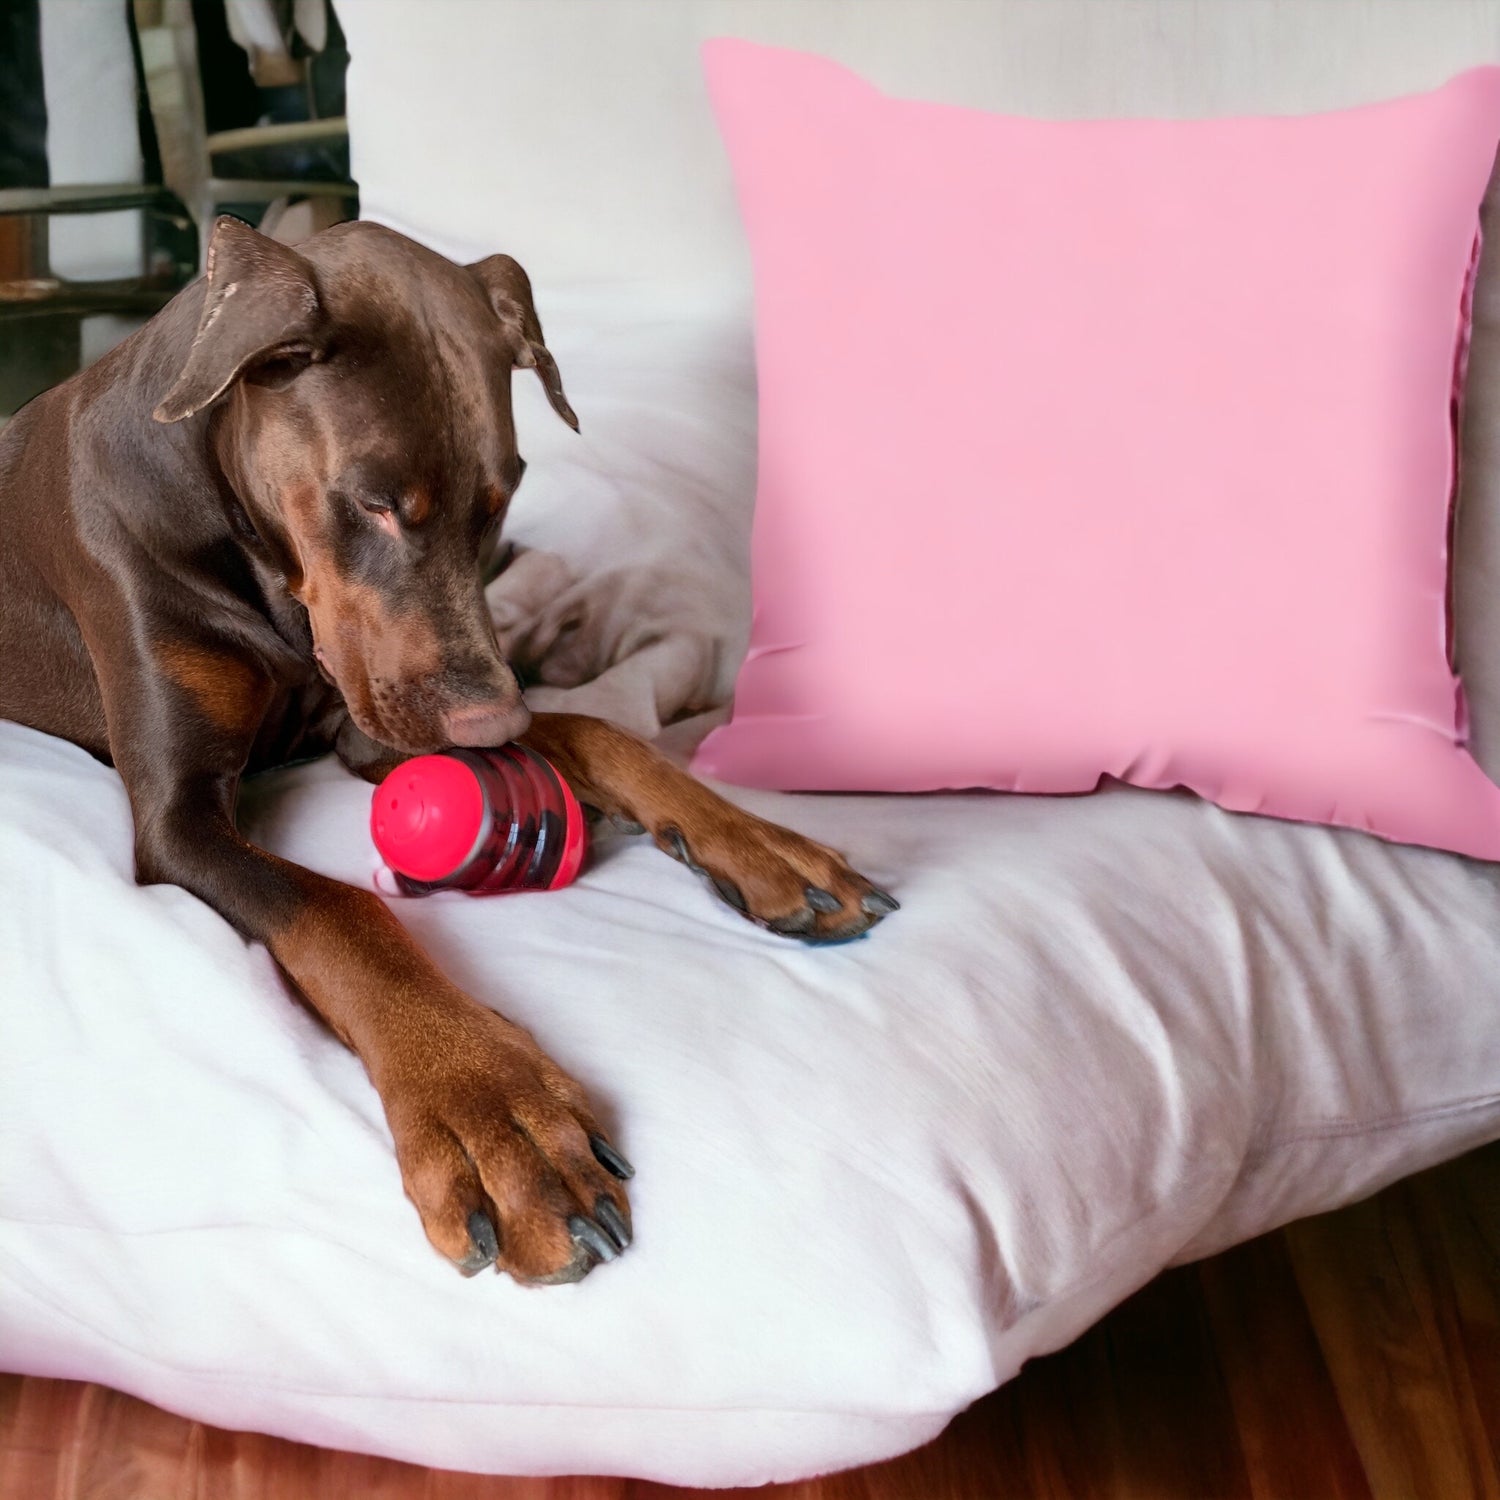 Beyond Fun: The Vital Role of Toys in Your Pet's Well-Being